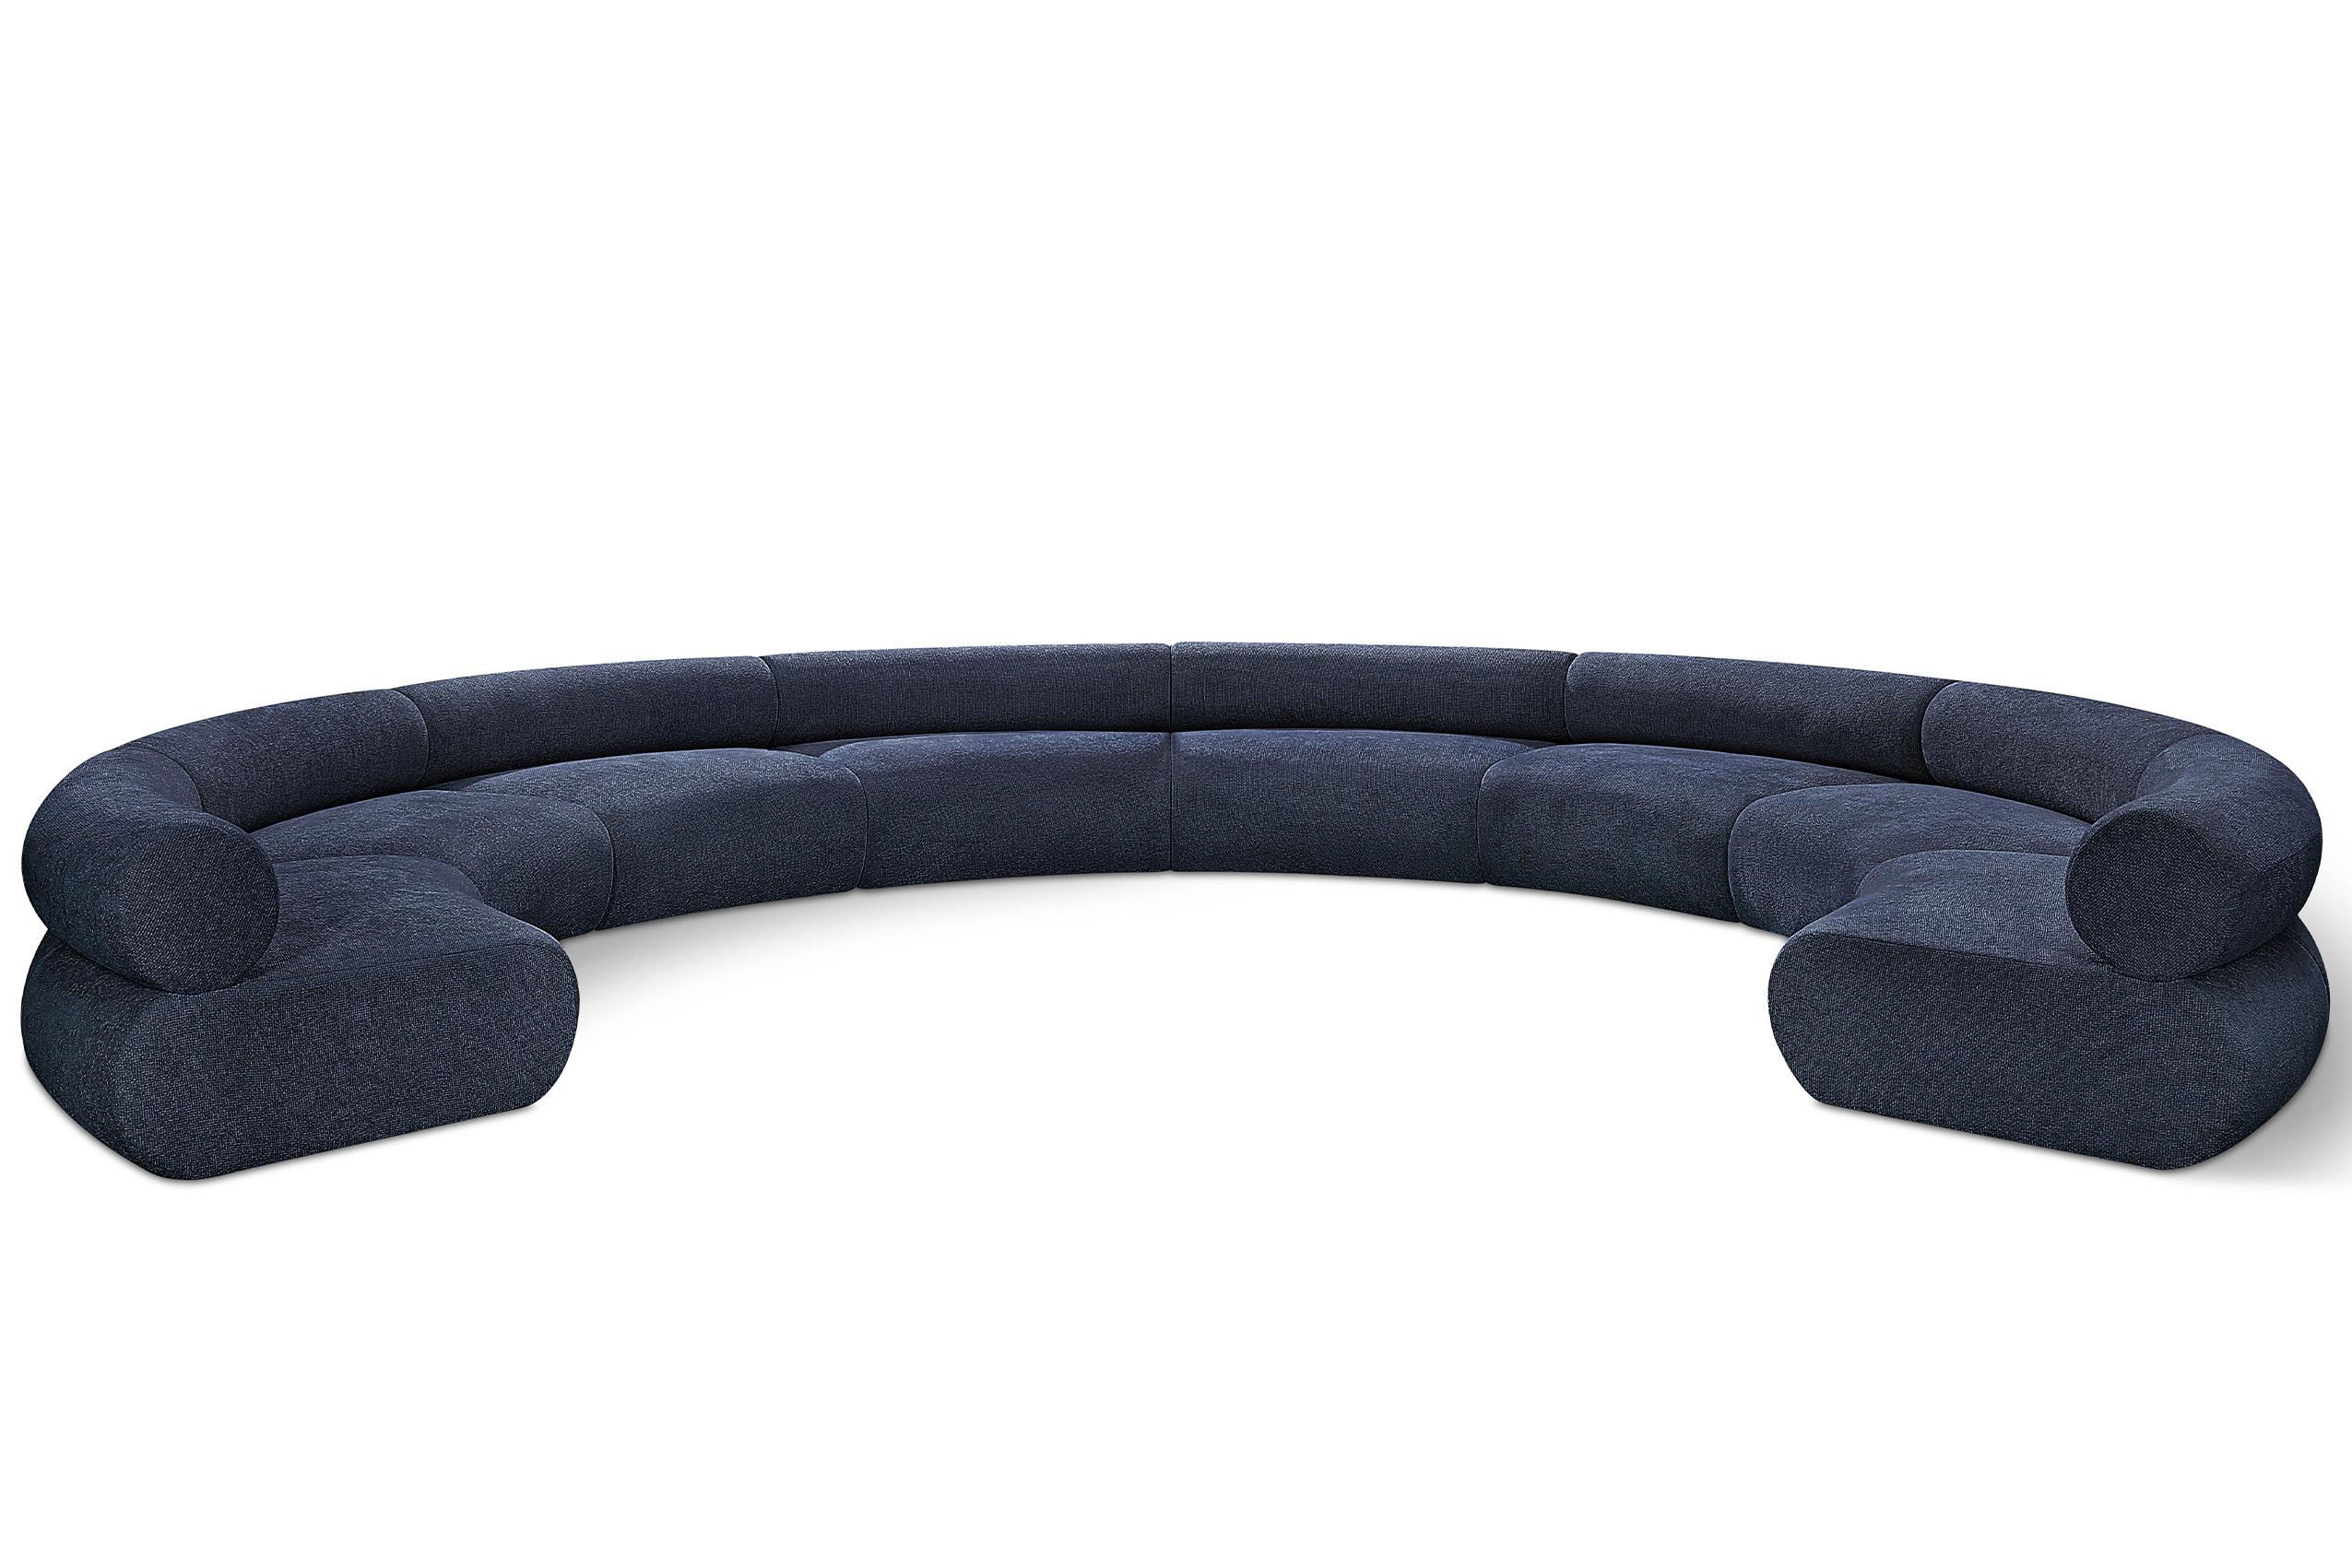 Contemporary, Modern Modular Sectional Sofa Bale 114Navy-S8A 114Navy-S8A in Navy Chenille